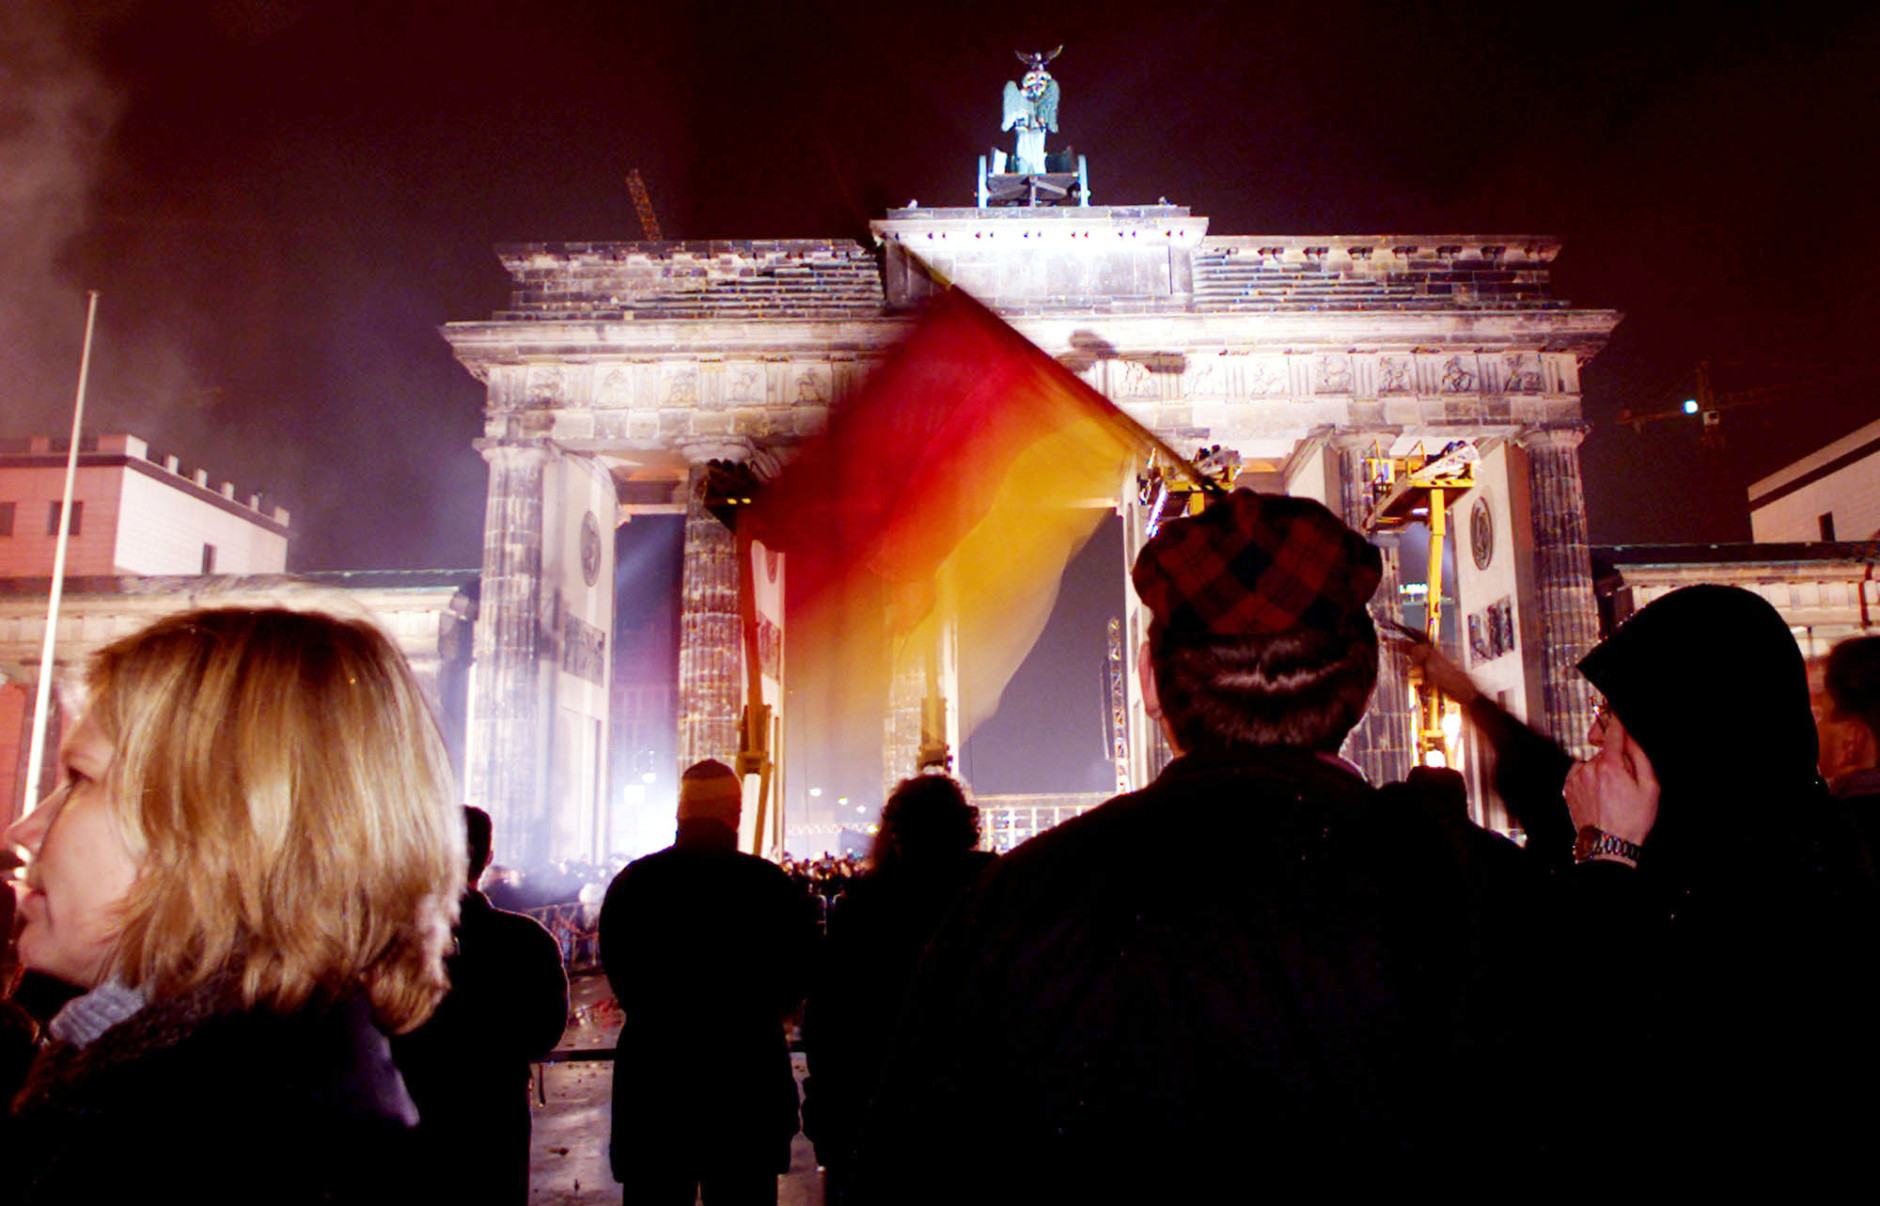 A young man waves a German flag in front of the Brandenburg gate during a party marking the tenth anniversary of the the fall of the Berlin Wall, in Berlin,Tuesday, November 9, 1999. (AP Photo/Jockel Finck)